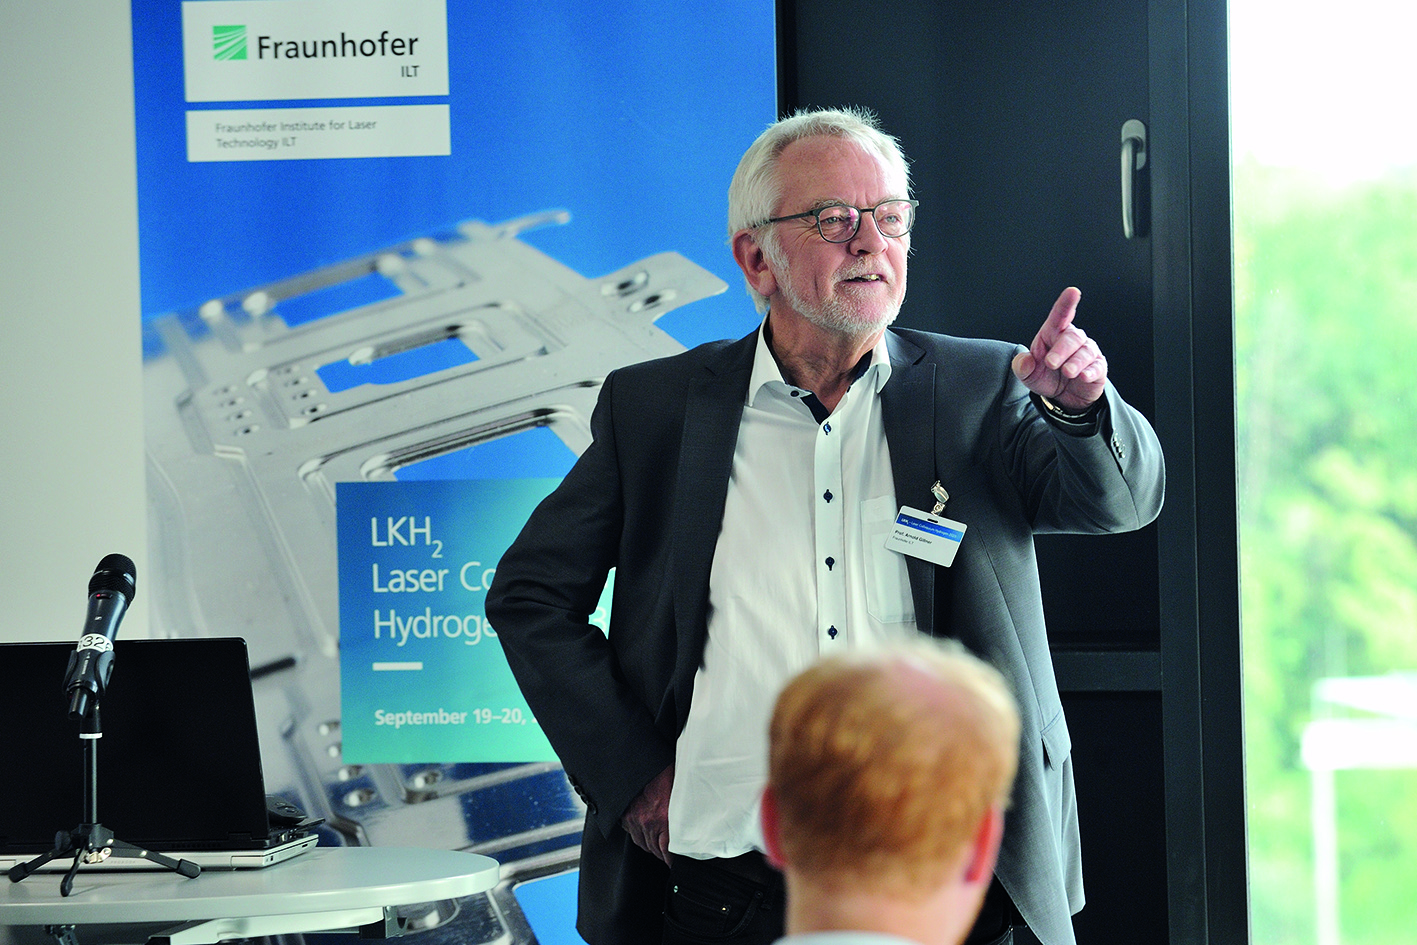 Prof. Arnold Gillner, Head of Business Development Research Markets at Fraunhofer ILT: “We are looking for six industrial partners from small, medium, but also gladly larger companies to join our ‘Lasers in hydrogen technology’ network.”